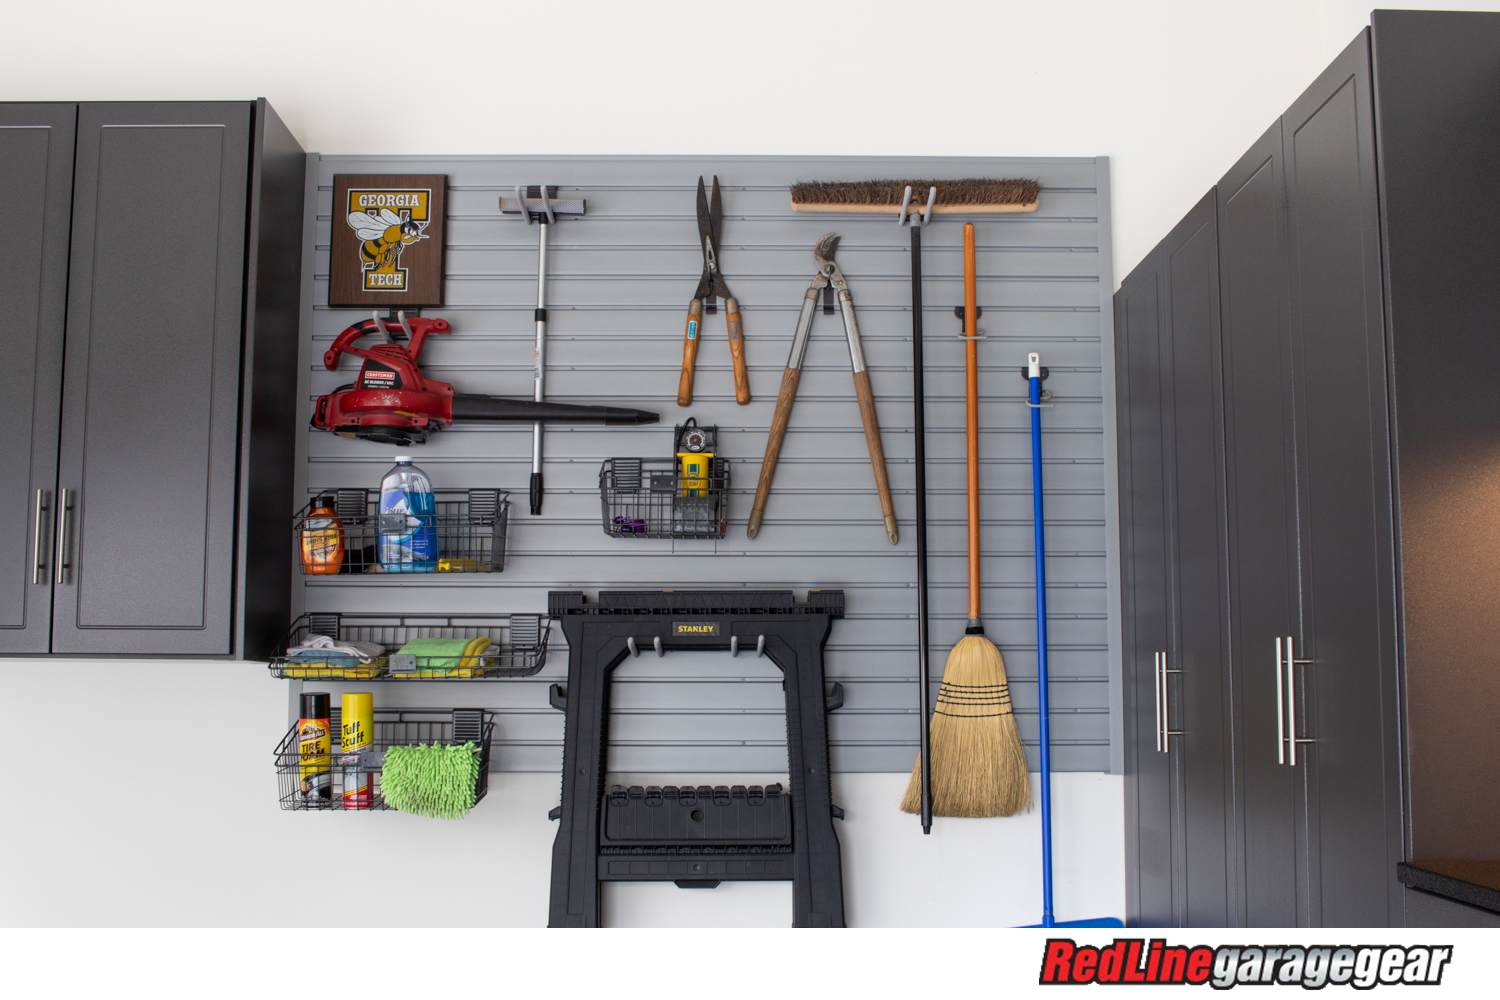 How to Organize Your Garage on Nearly Any Budget